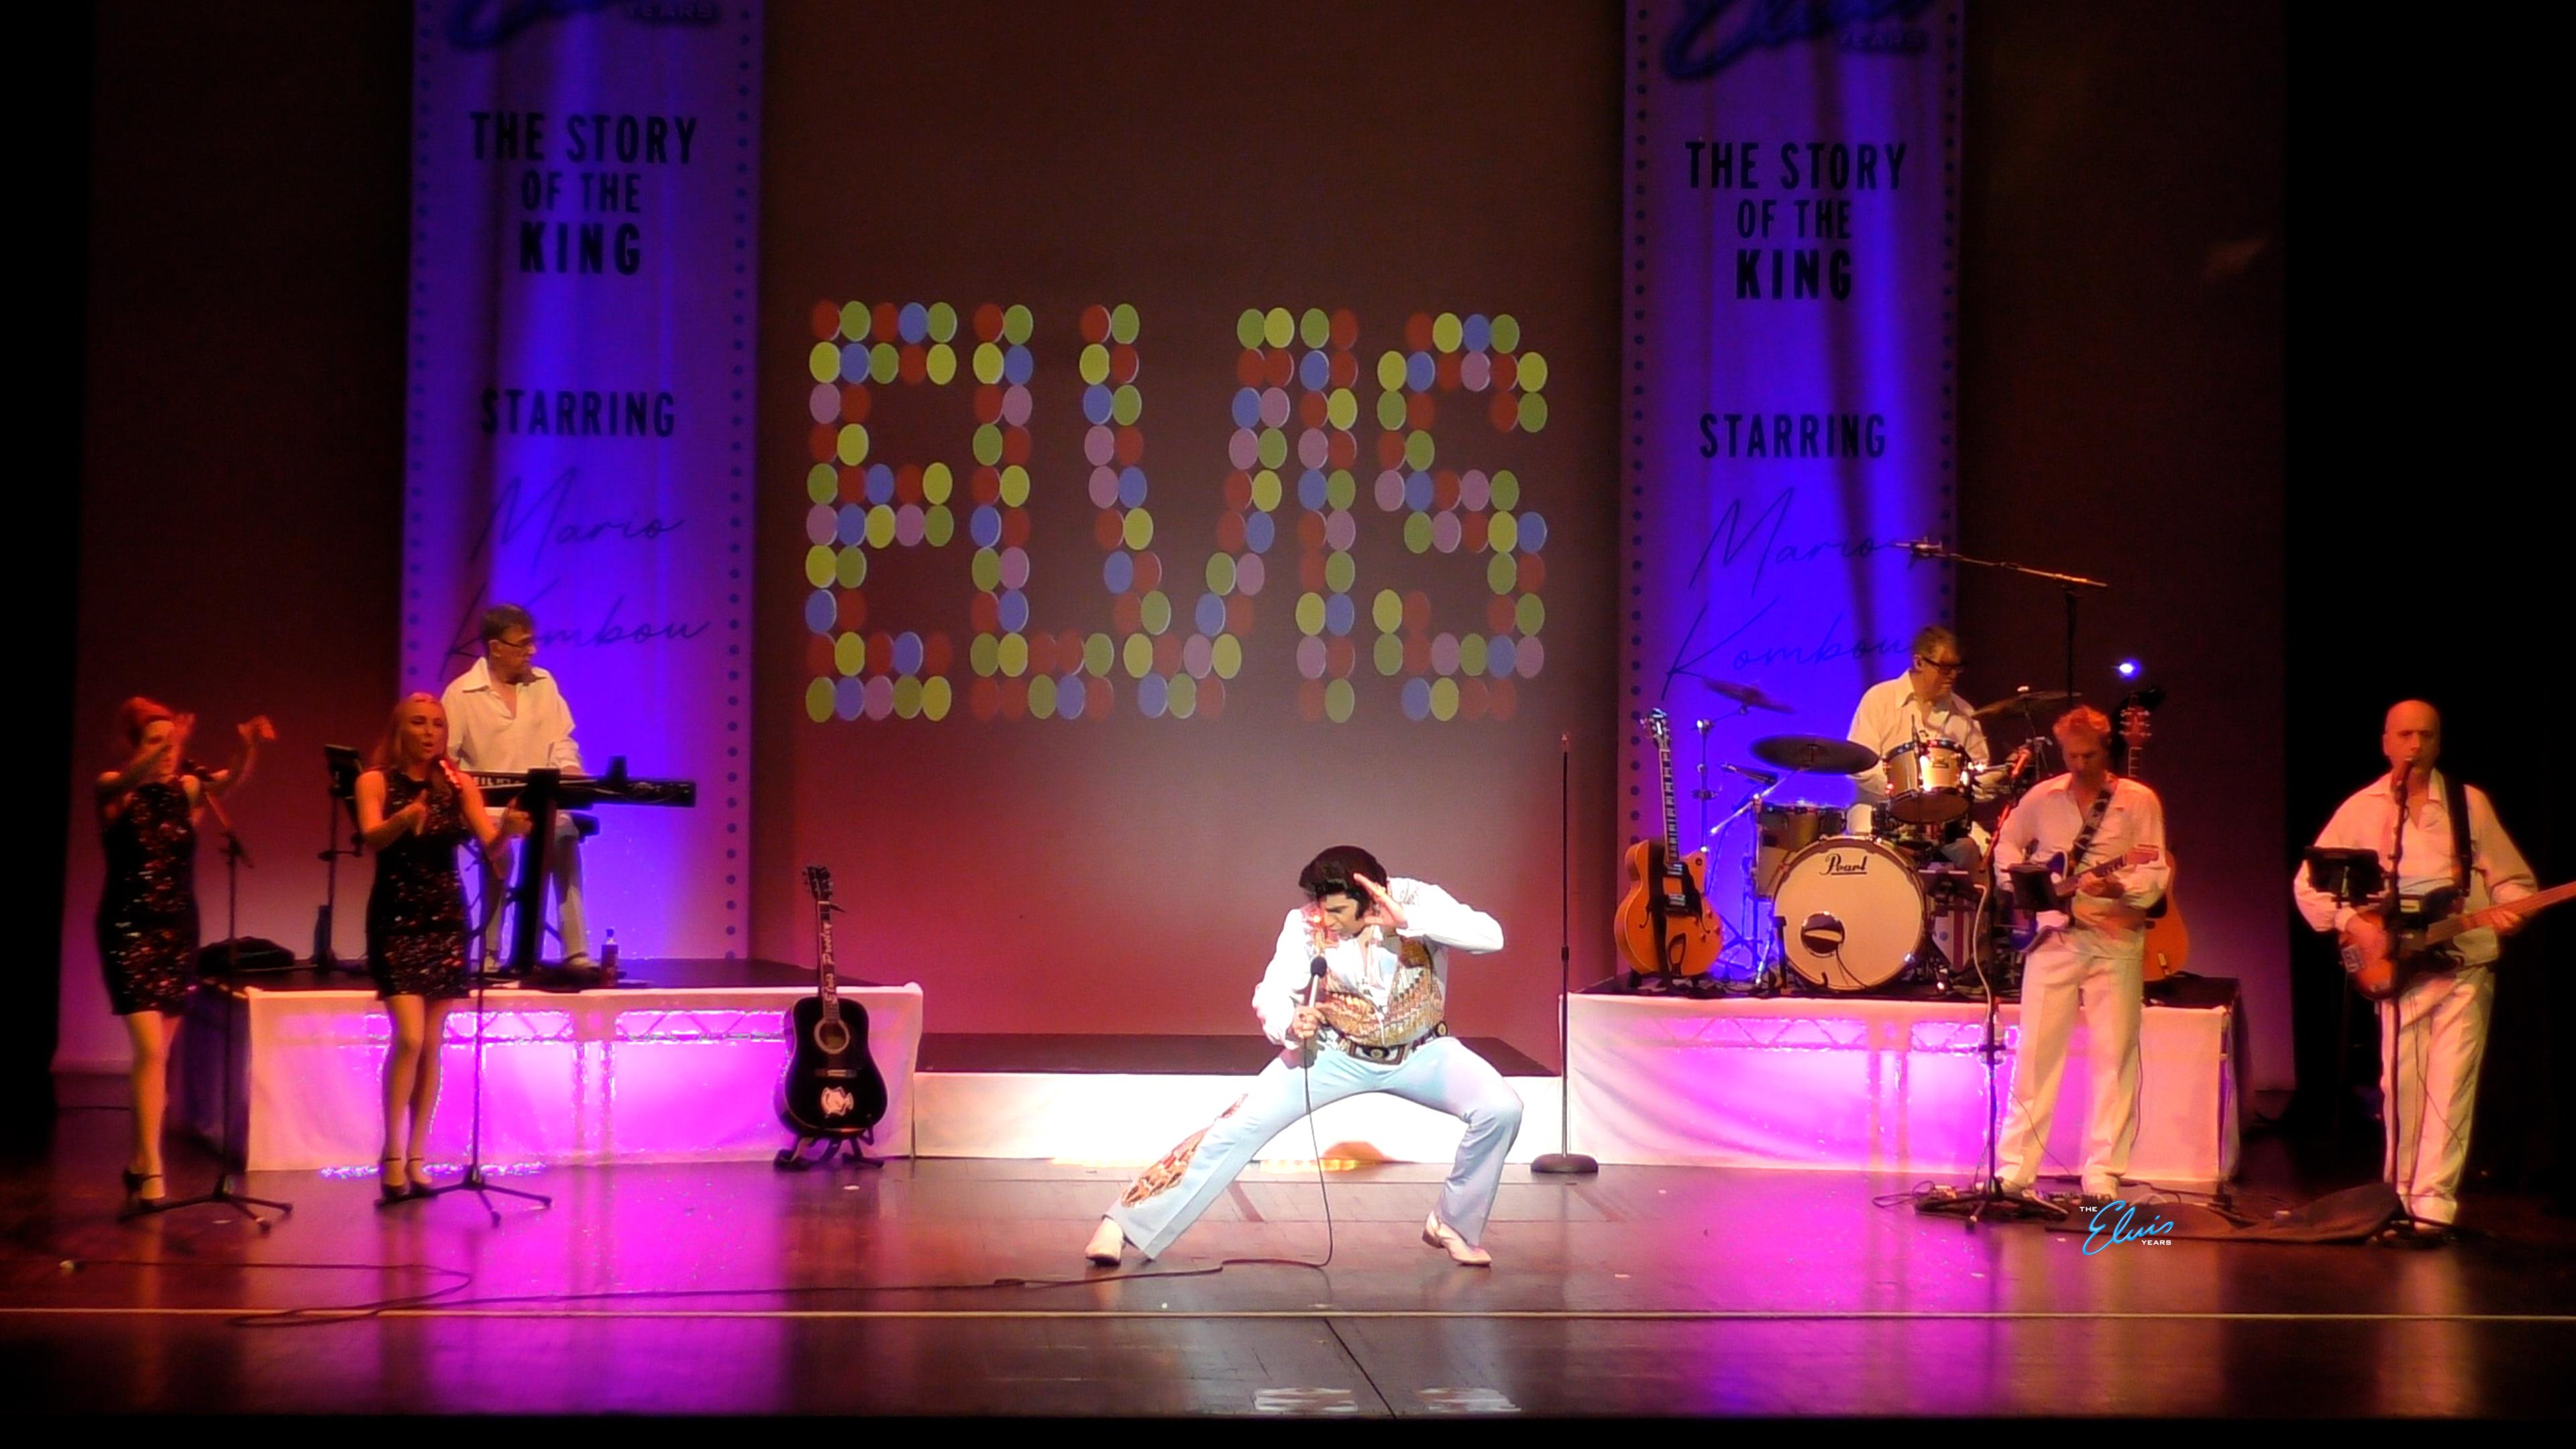 Man singing and lunging on stage 